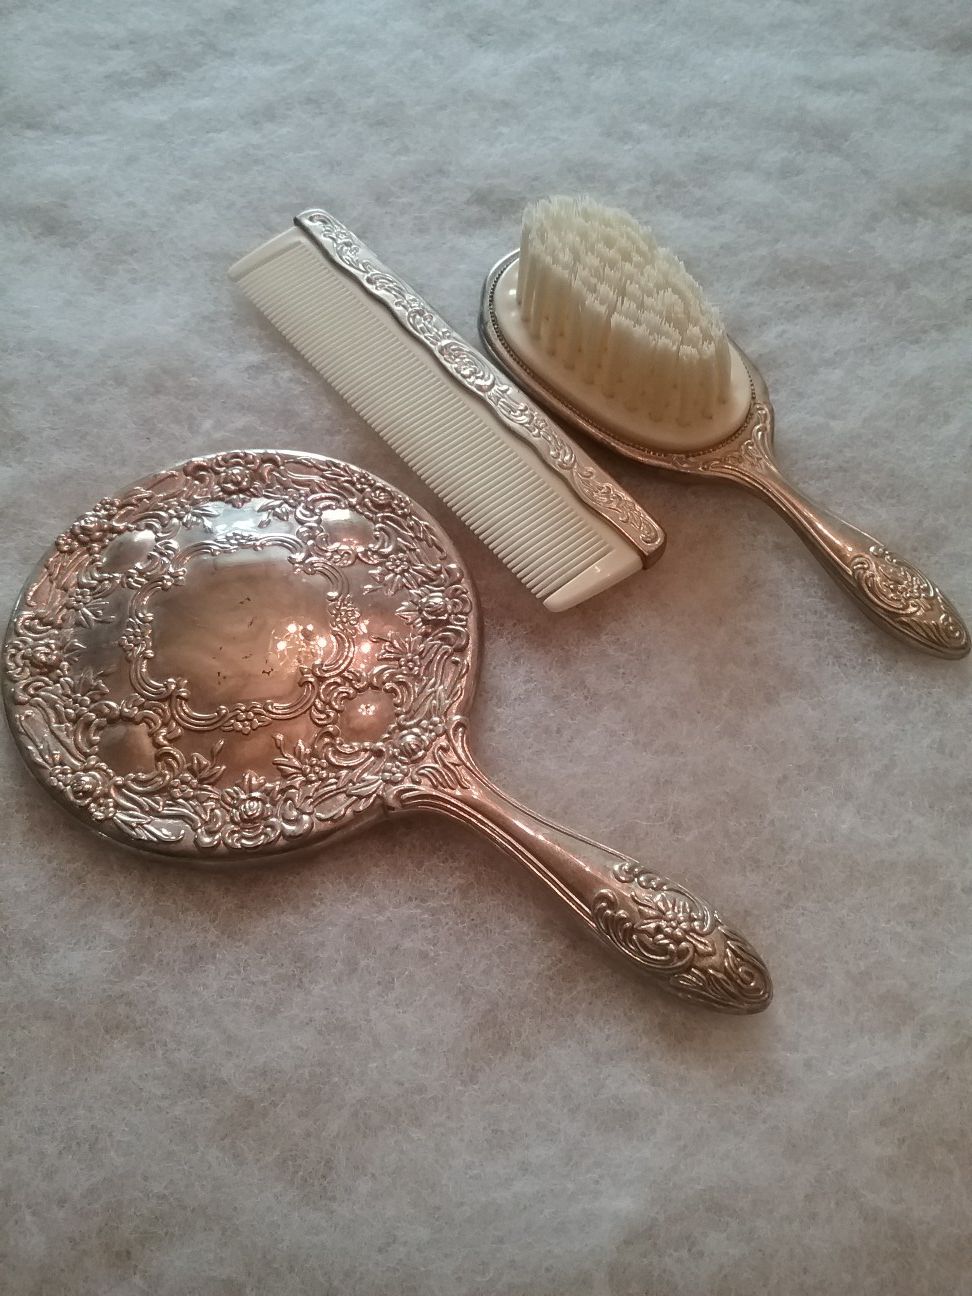 ANTIQUE STYLE CHILD'S MIRROR,BRUSH AND COMB SET